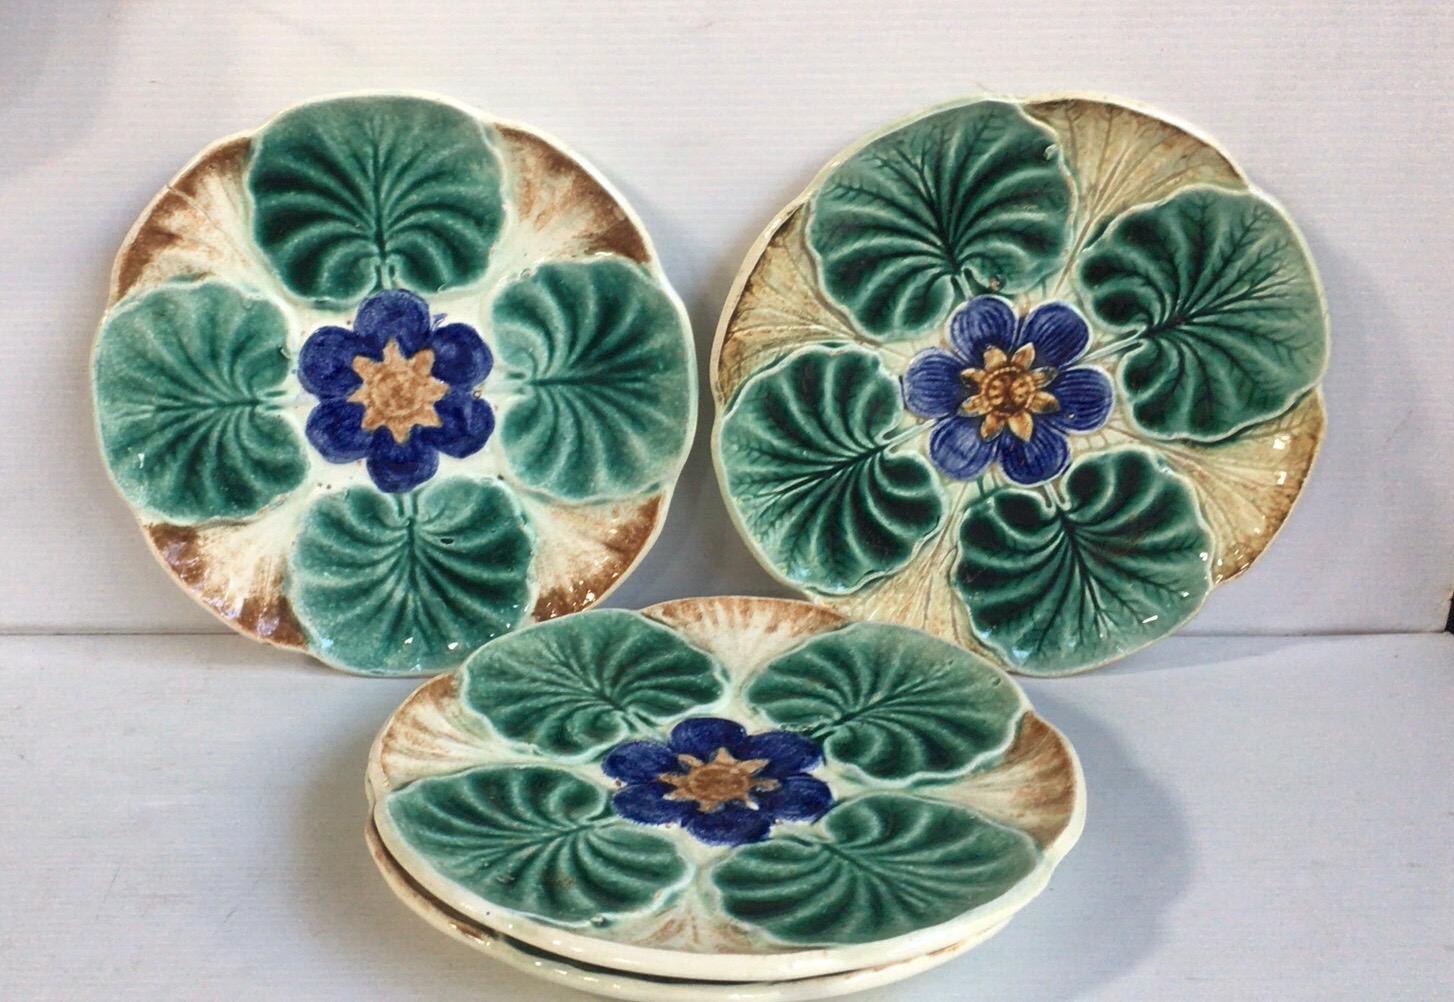 Majolica water lily pond plate Wasmuel, circa 1890.
3 plates available.